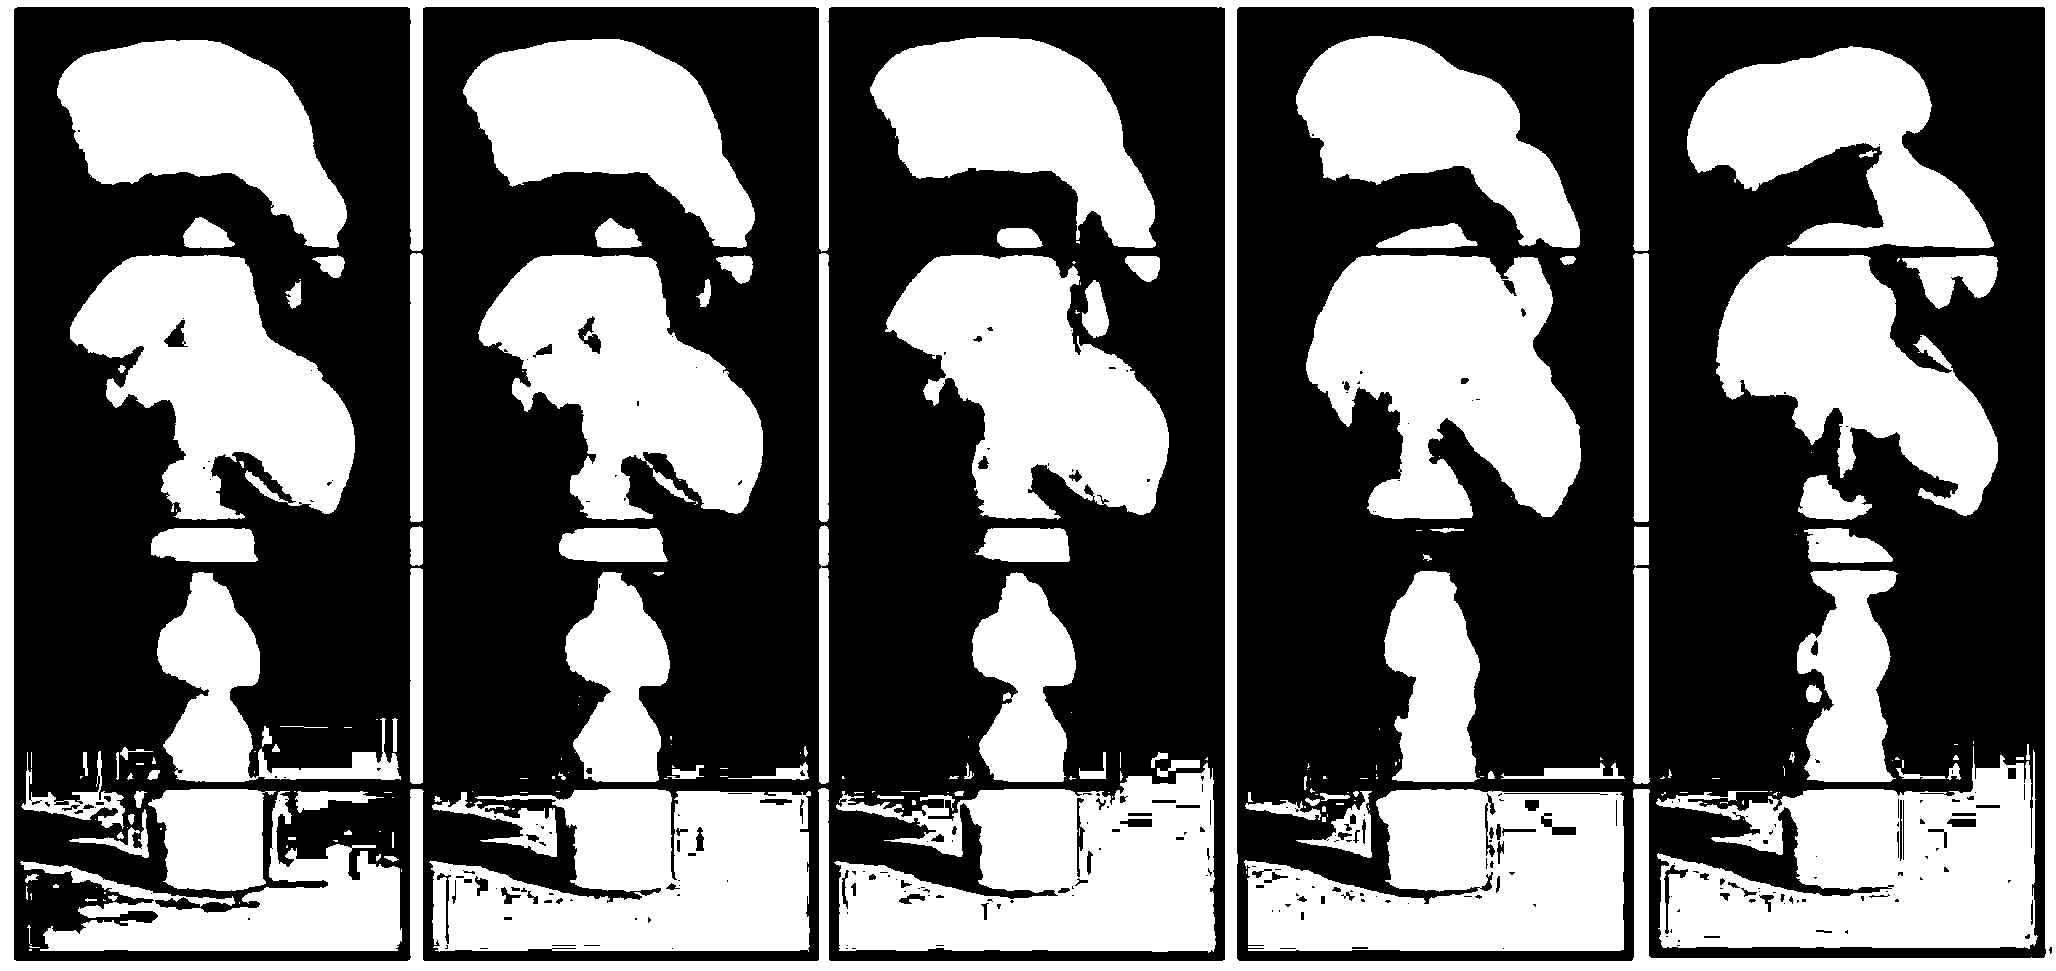 Fluid animation rendering method based on detail capturing and form correcting